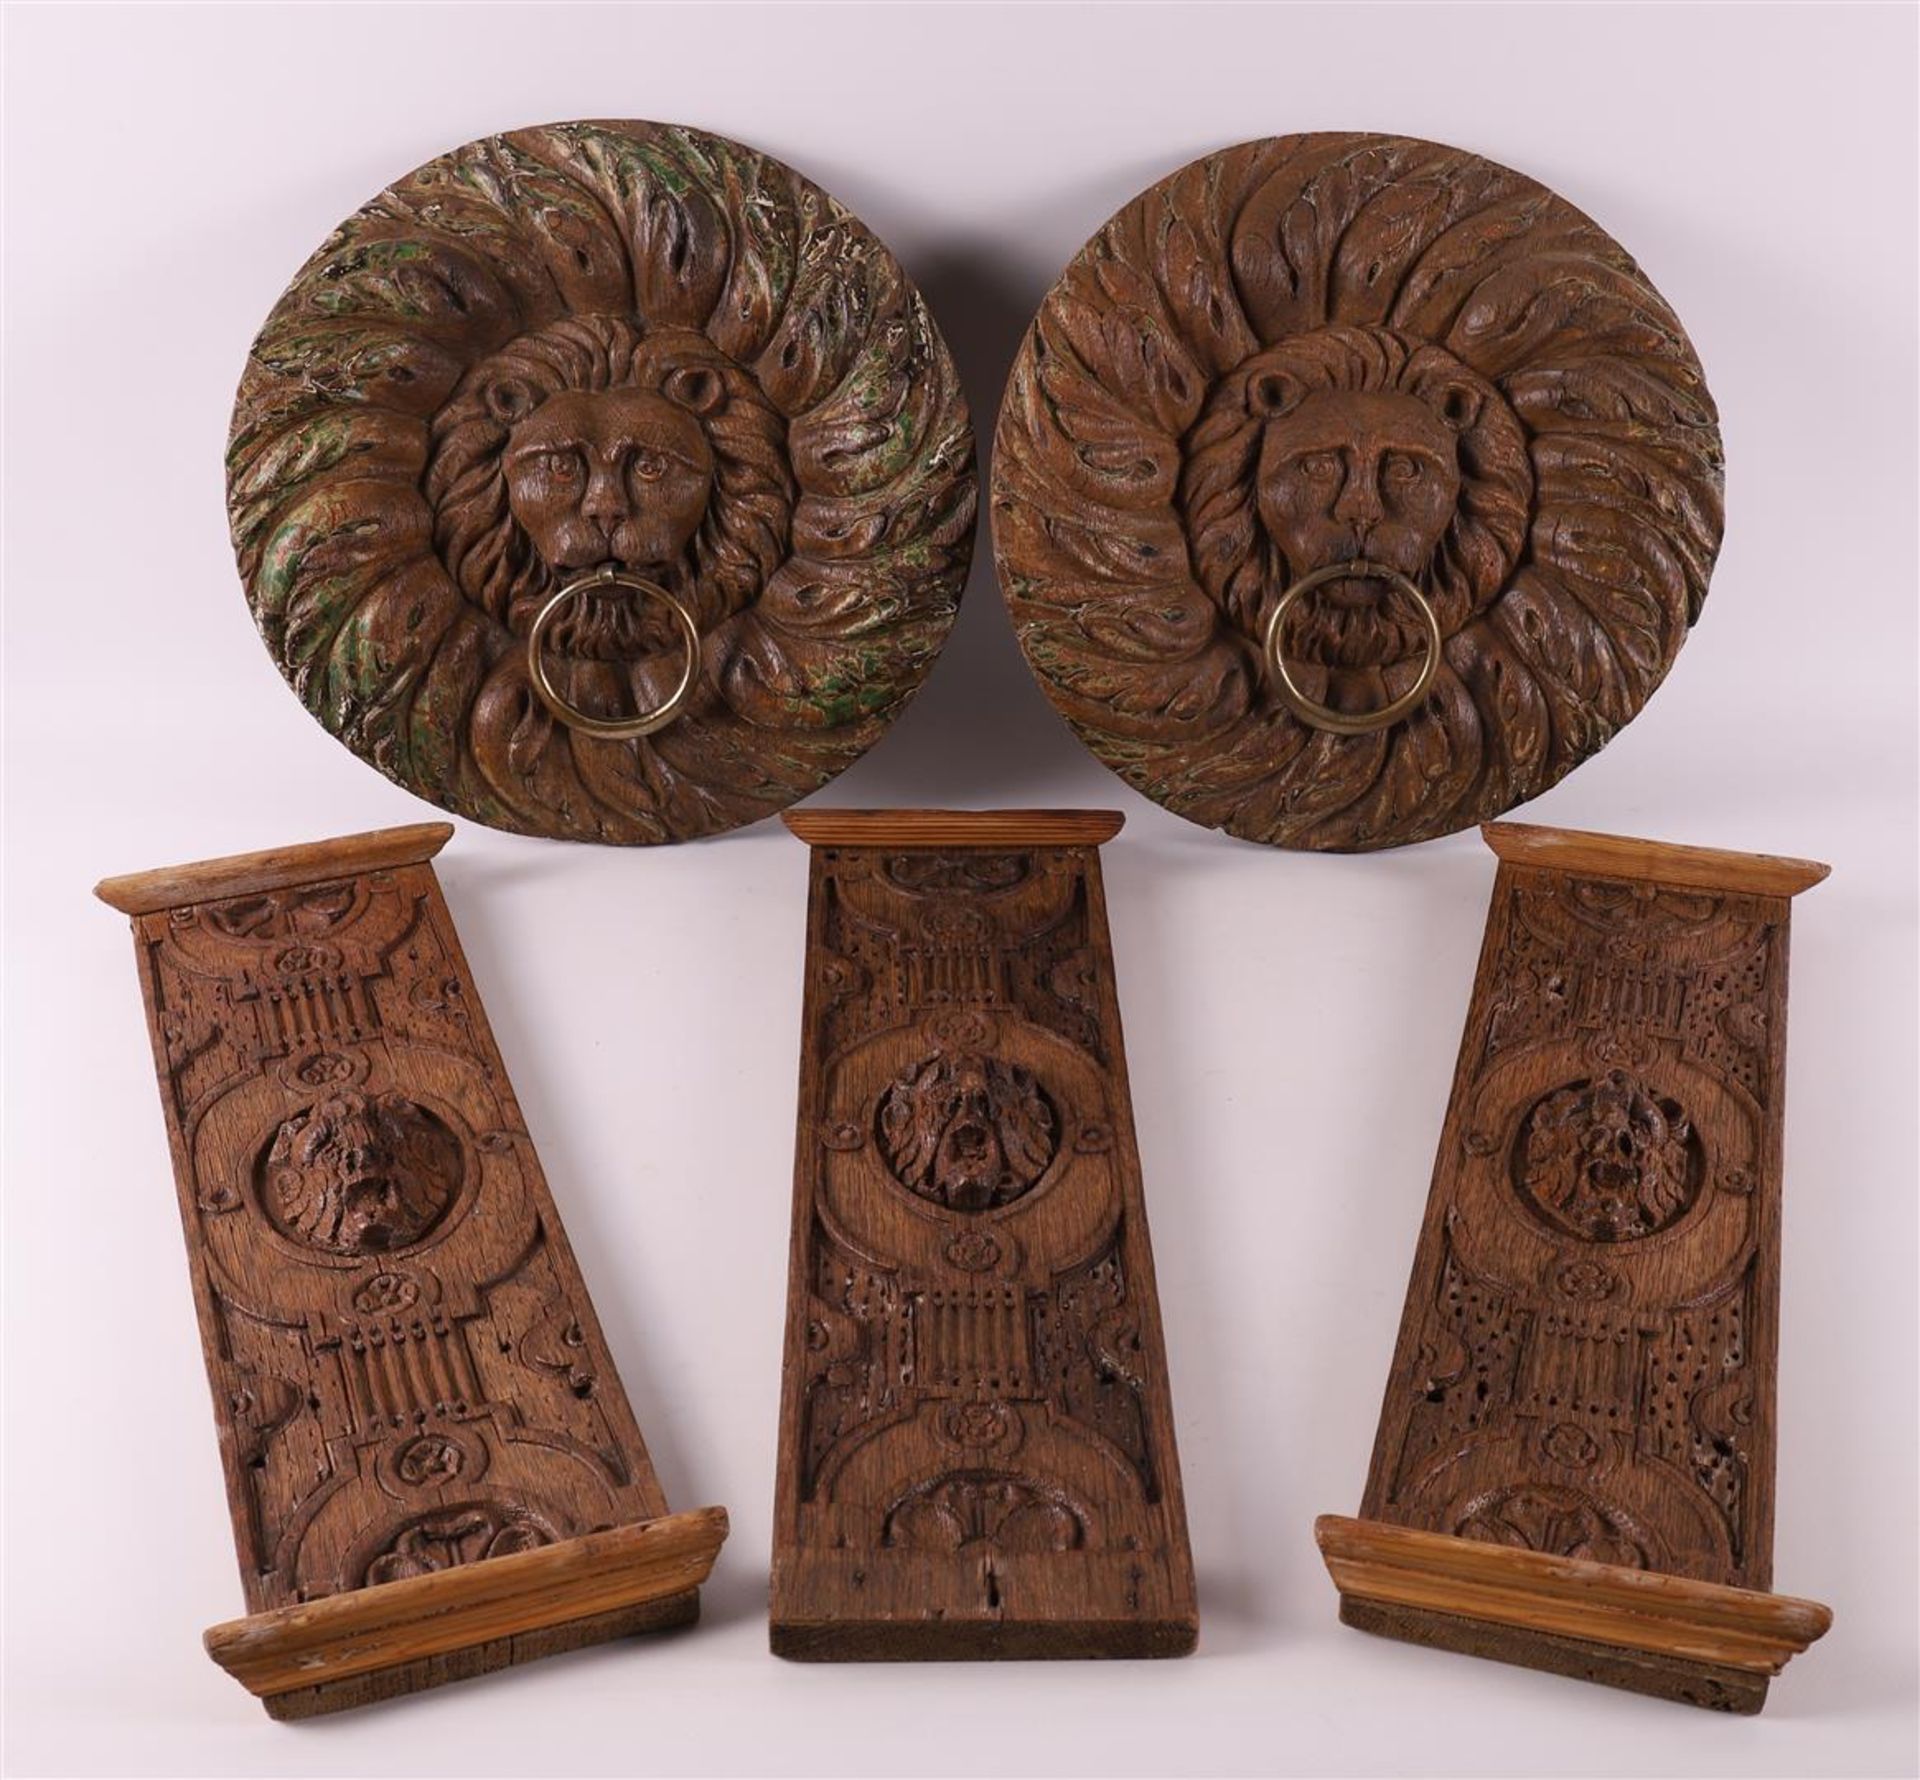 Two carved wooden rosettes of ringed lion heads, 18th century